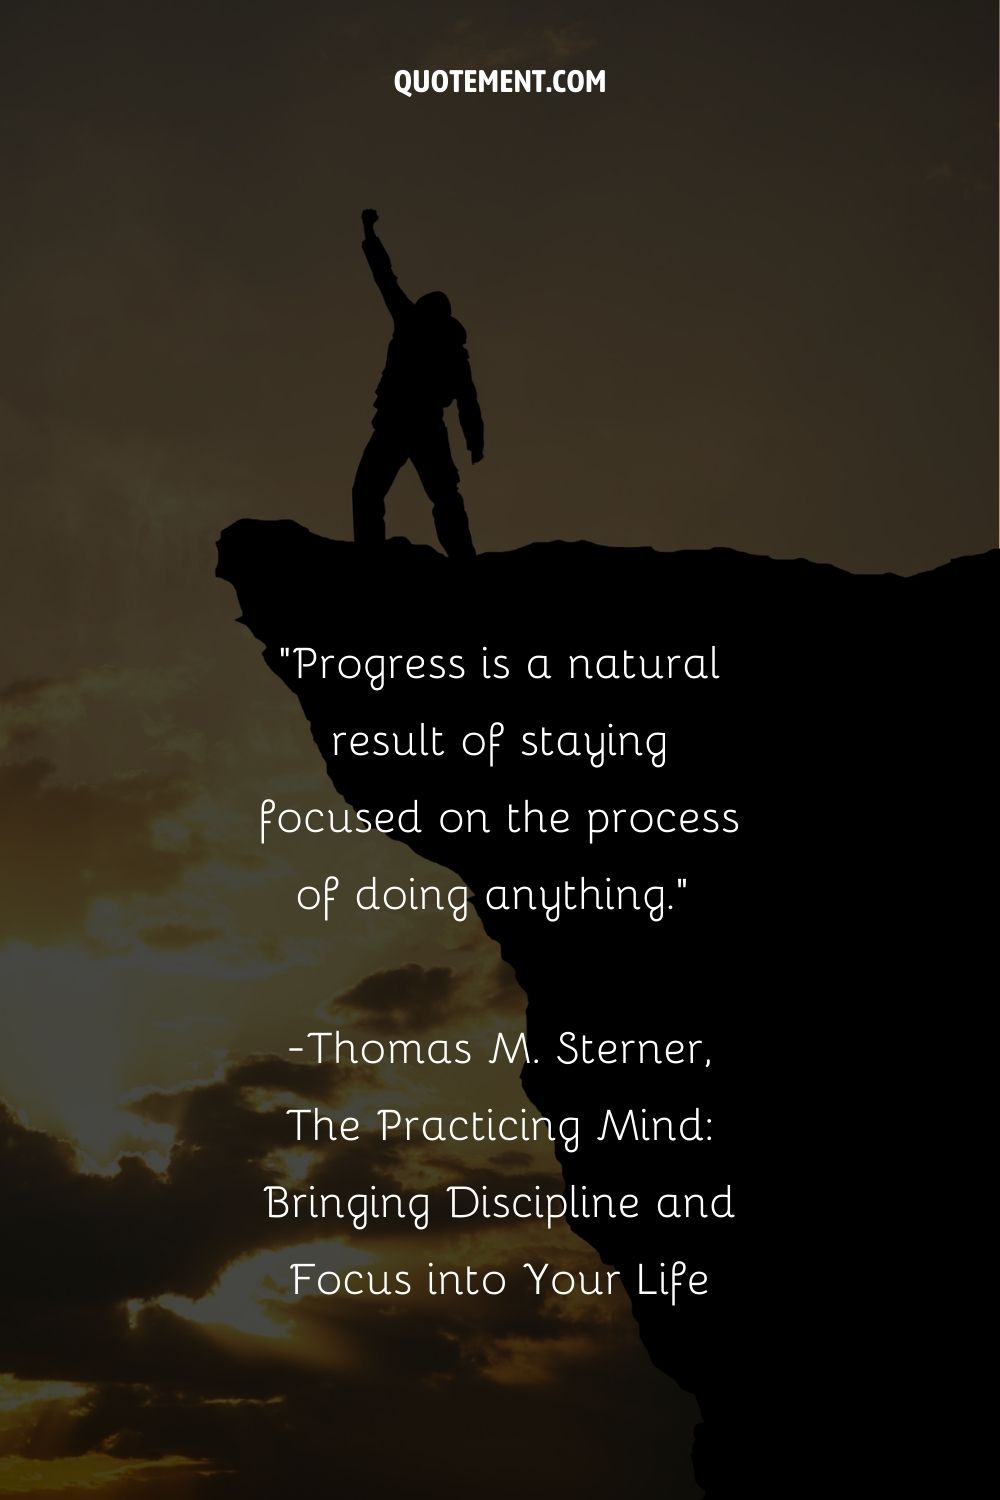 Progress is a natural result of staying focused on the process of doing anything